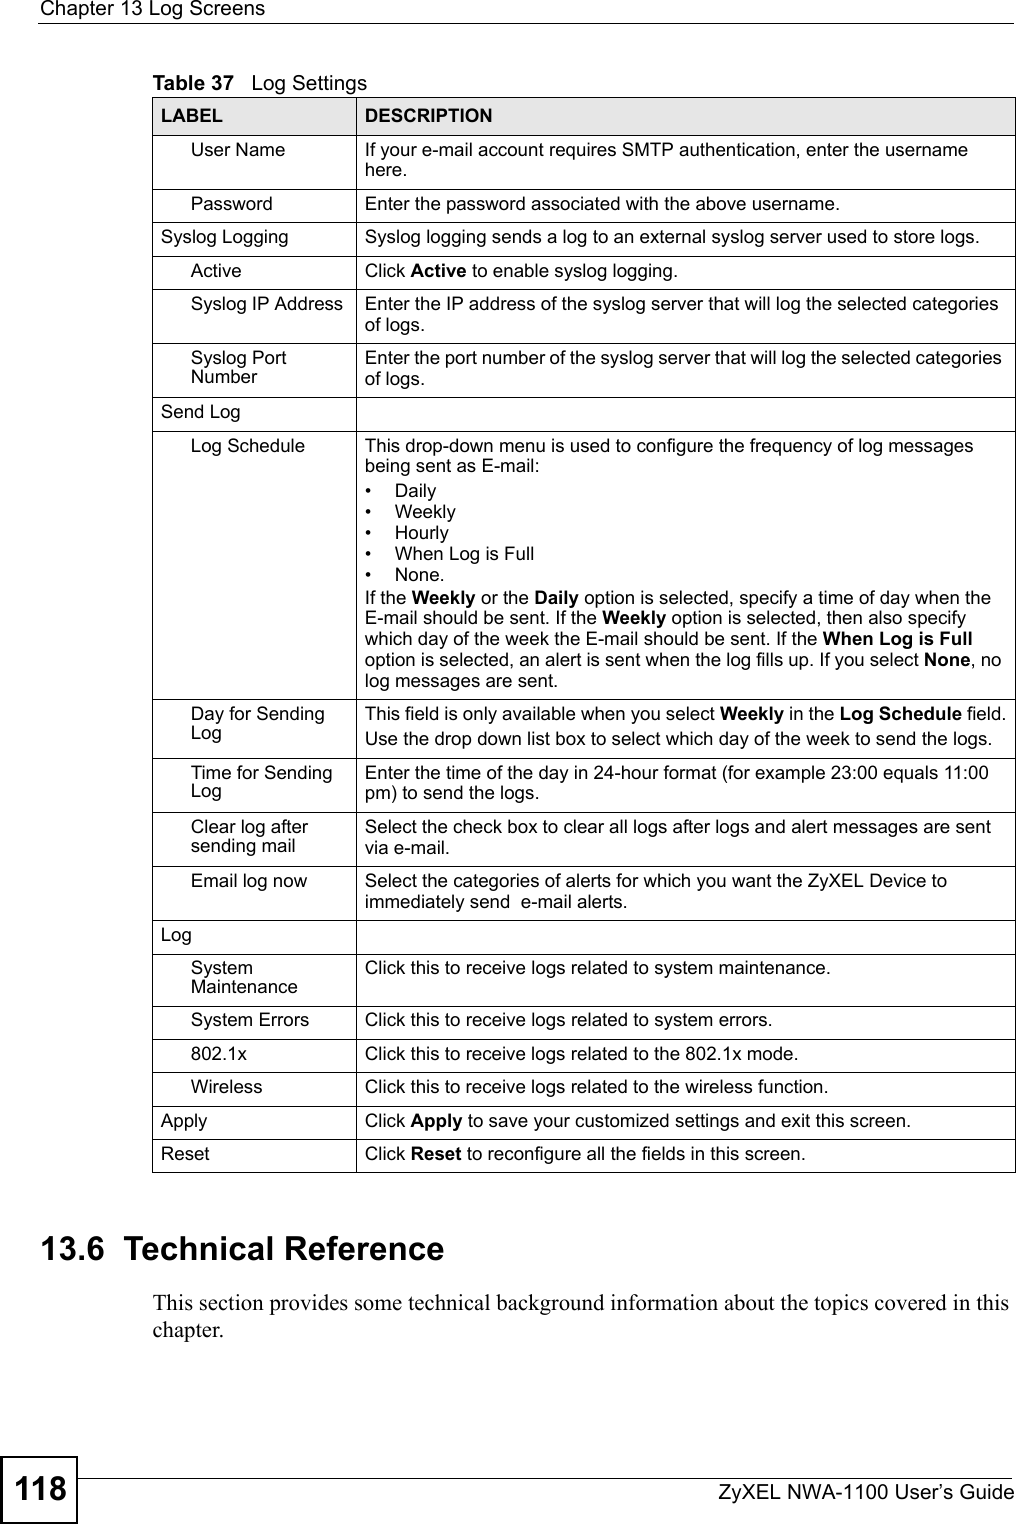 Chapter 13 Log ScreensZyXEL NWA-1100 User’s Guide11813.6  Technical ReferenceThis section provides some technical background information about the topics covered in this chapter.User Name If your e-mail account requires SMTP authentication, enter the username here.Password Enter the password associated with the above username.Syslog Logging Syslog logging sends a log to an external syslog server used to store logs.Active Click Active to enable syslog logging.Syslog IP Address  Enter the IP address of the syslog server that will log the selected categories of logs.Syslog Port NumberEnter the port number of the syslog server that will log the selected categories of logs.Send LogLog Schedule This drop-down menu is used to configure the frequency of log messages being sent as E-mail: • Daily• Weekly• Hourly• When Log is Full• None. If the Weekly or the Daily option is selected, specify a time of day when the E-mail should be sent. If the Weekly option is selected, then also specify which day of the week the E-mail should be sent. If the When Log is Full option is selected, an alert is sent when the log fills up. If you select None, no log messages are sent.Day for Sending LogThis field is only available when you select Weekly in the Log Schedule field.Use the drop down list box to select which day of the week to send the logs. Time for Sending LogEnter the time of the day in 24-hour format (for example 23:00 equals 11:00 pm) to send the logs. Clear log after sending mailSelect the check box to clear all logs after logs and alert messages are sent via e-mail.Email log now Select the categories of alerts for which you want the ZyXEL Device to immediately send  e-mail alerts.LogSystem MaintenanceClick this to receive logs related to system maintenance.System Errors Click this to receive logs related to system errors.802.1x Click this to receive logs related to the 802.1x mode.Wireless Click this to receive logs related to the wireless function.Apply Click Apply to save your customized settings and exit this screen. Reset Click Reset to reconfigure all the fields in this screen.Table 37   Log SettingsLABEL DESCRIPTION